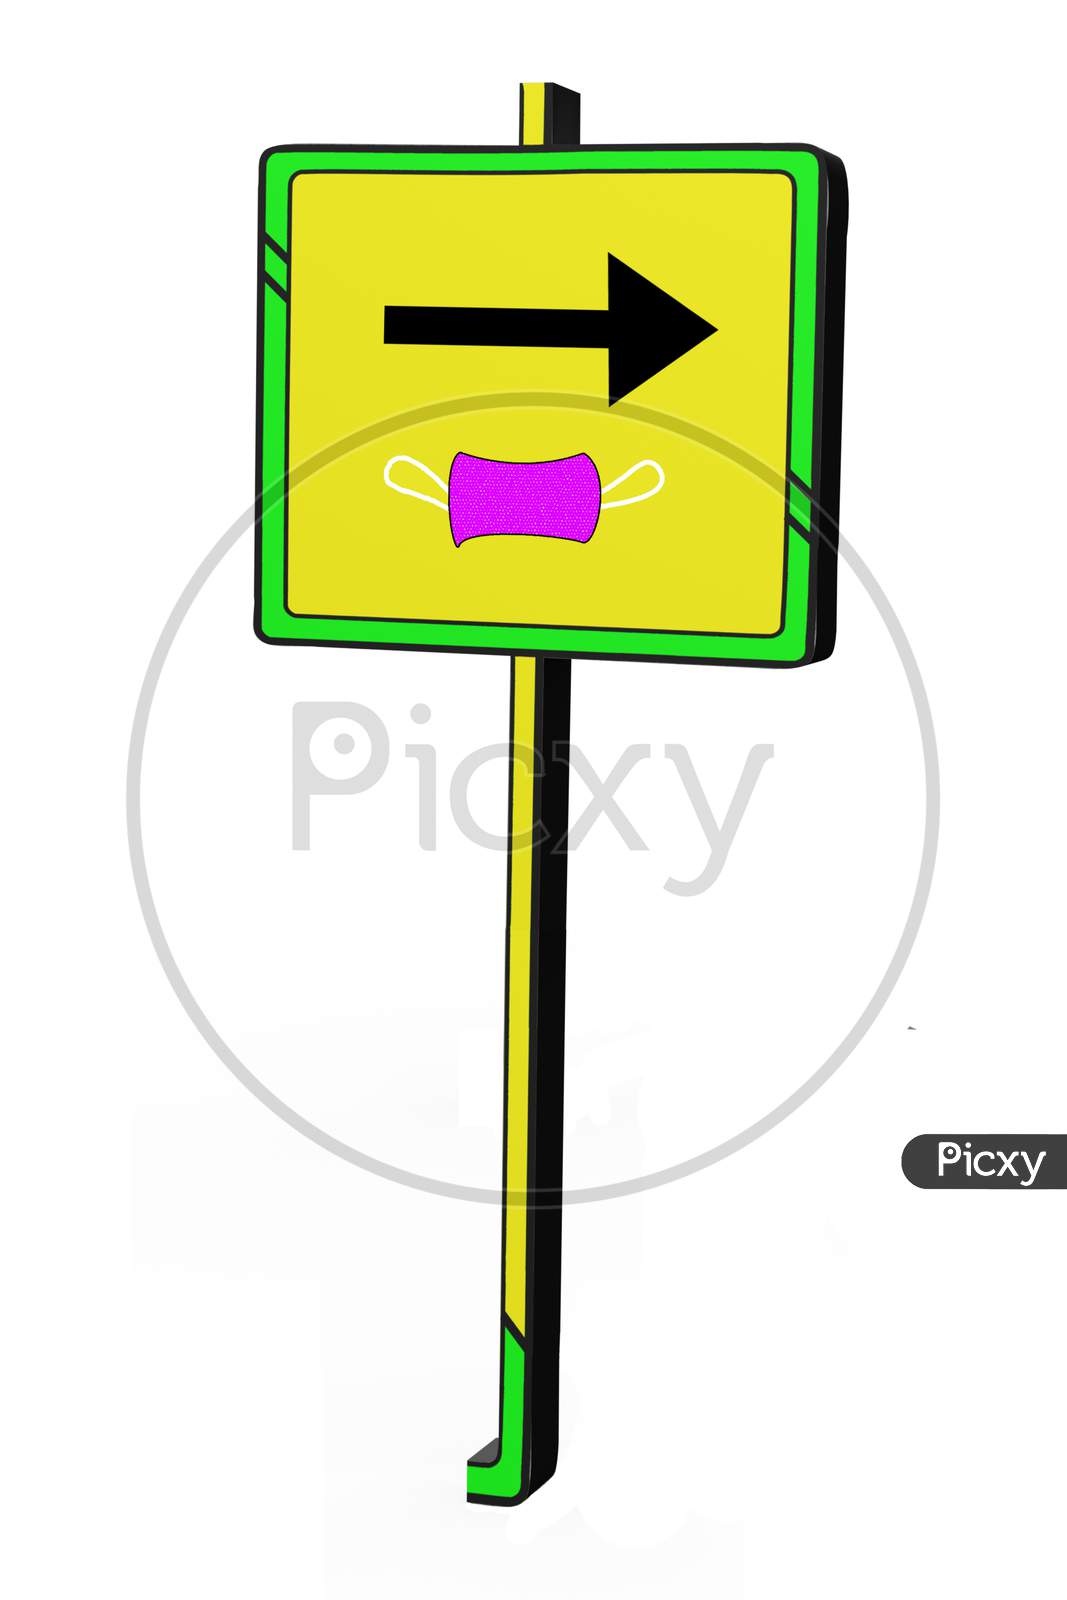 Alert For Wear Mask Traffic Signal Style 3D